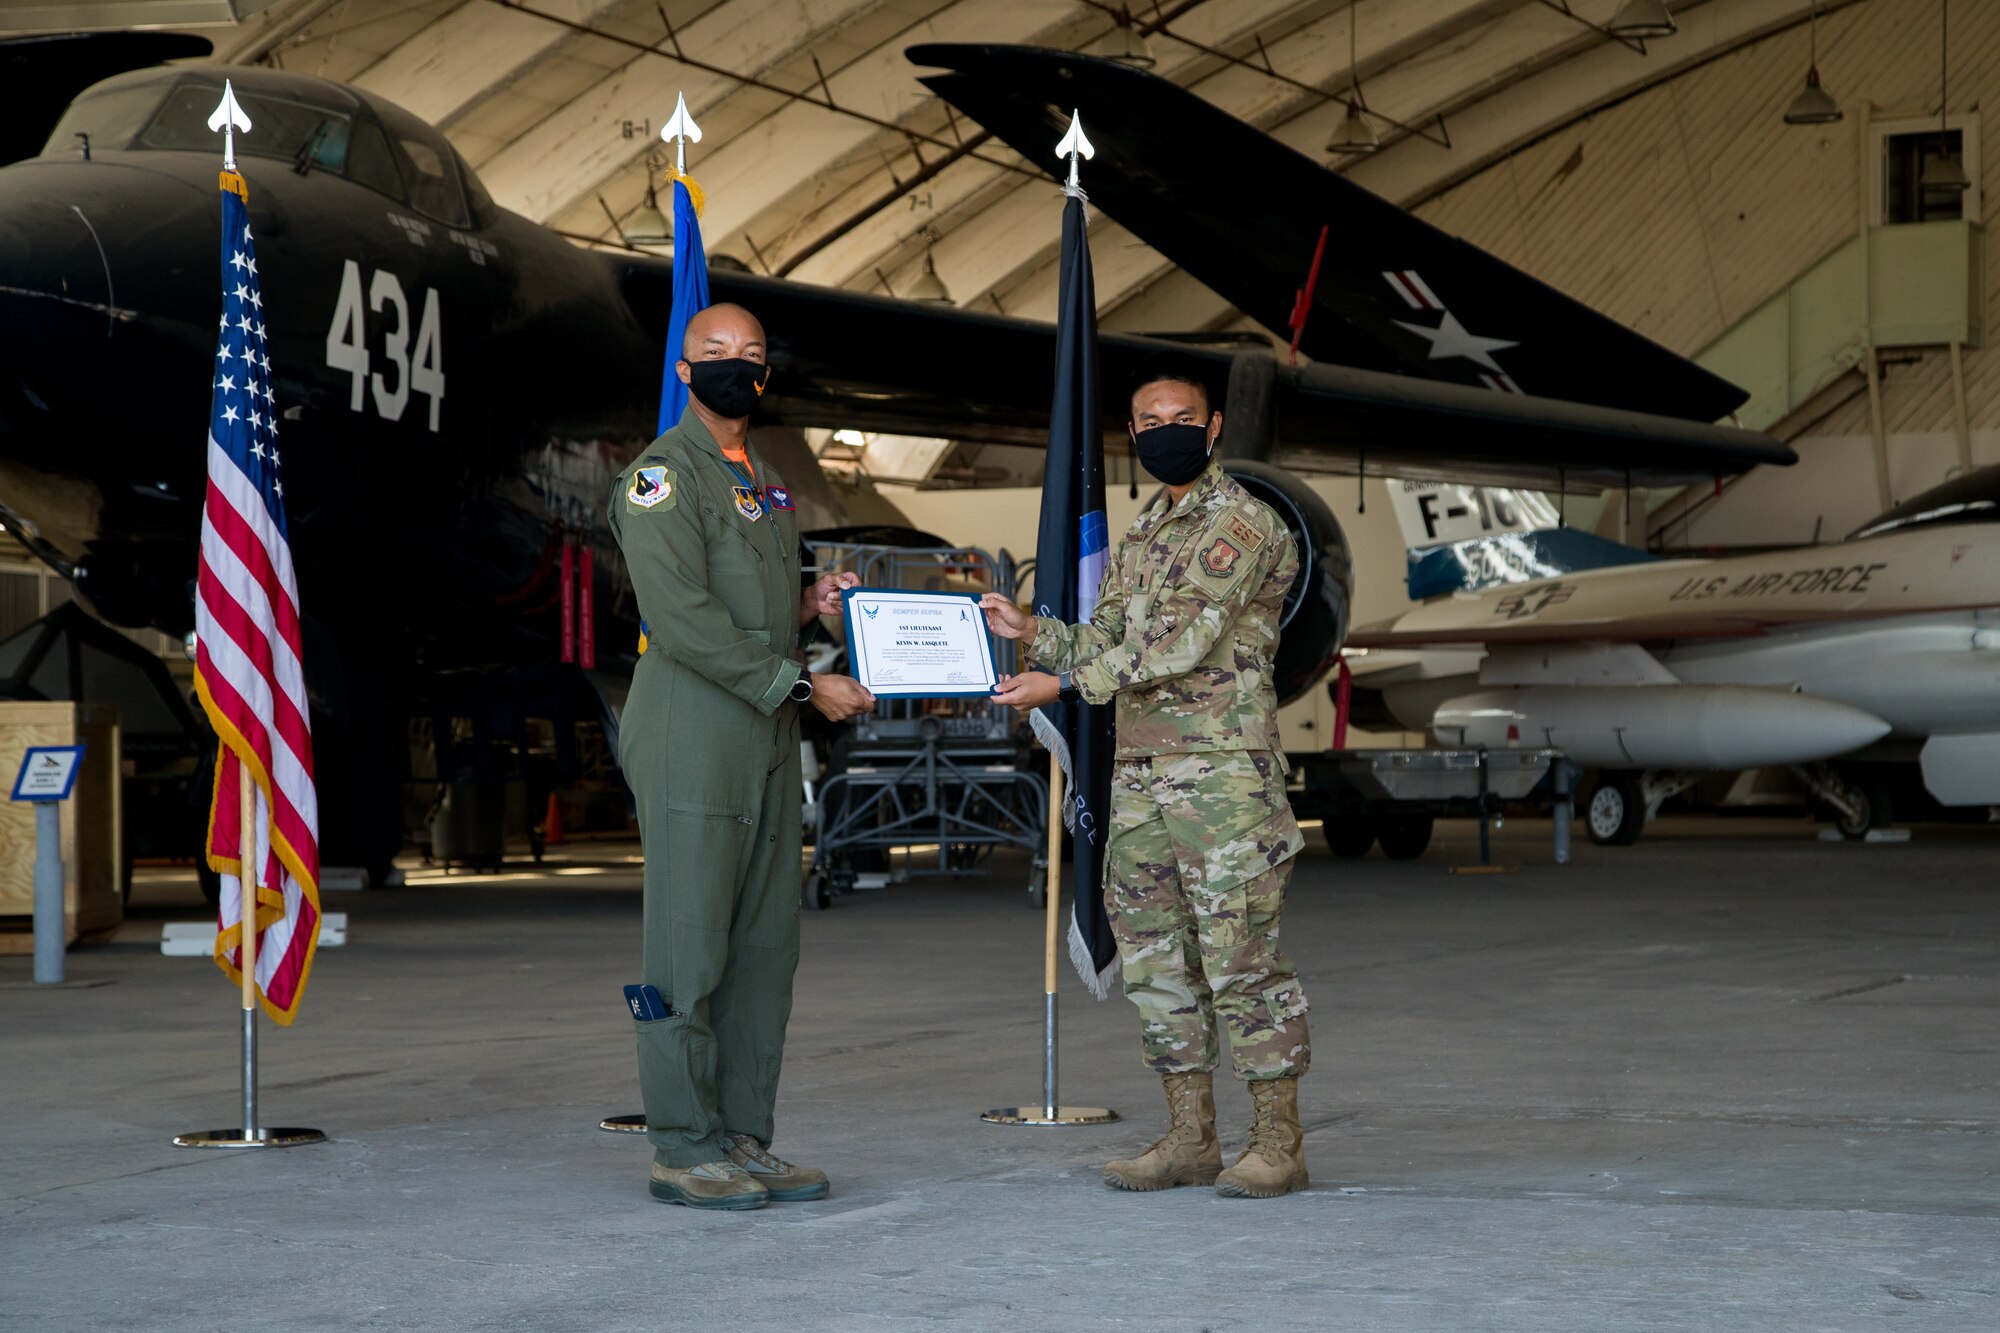 1st Lt. Kevin Lasquette, 772nd Test Squadron, originally from San Diego, California, accepts his U.S. Space Force certificate from Col. Randel Gordon, 412th Test Wing Vice Commander, during a Space Force Transfer Ceremony at Edwards Air Force Base, California, Feb. 11. (Air Force photo by Richard Gonzales)